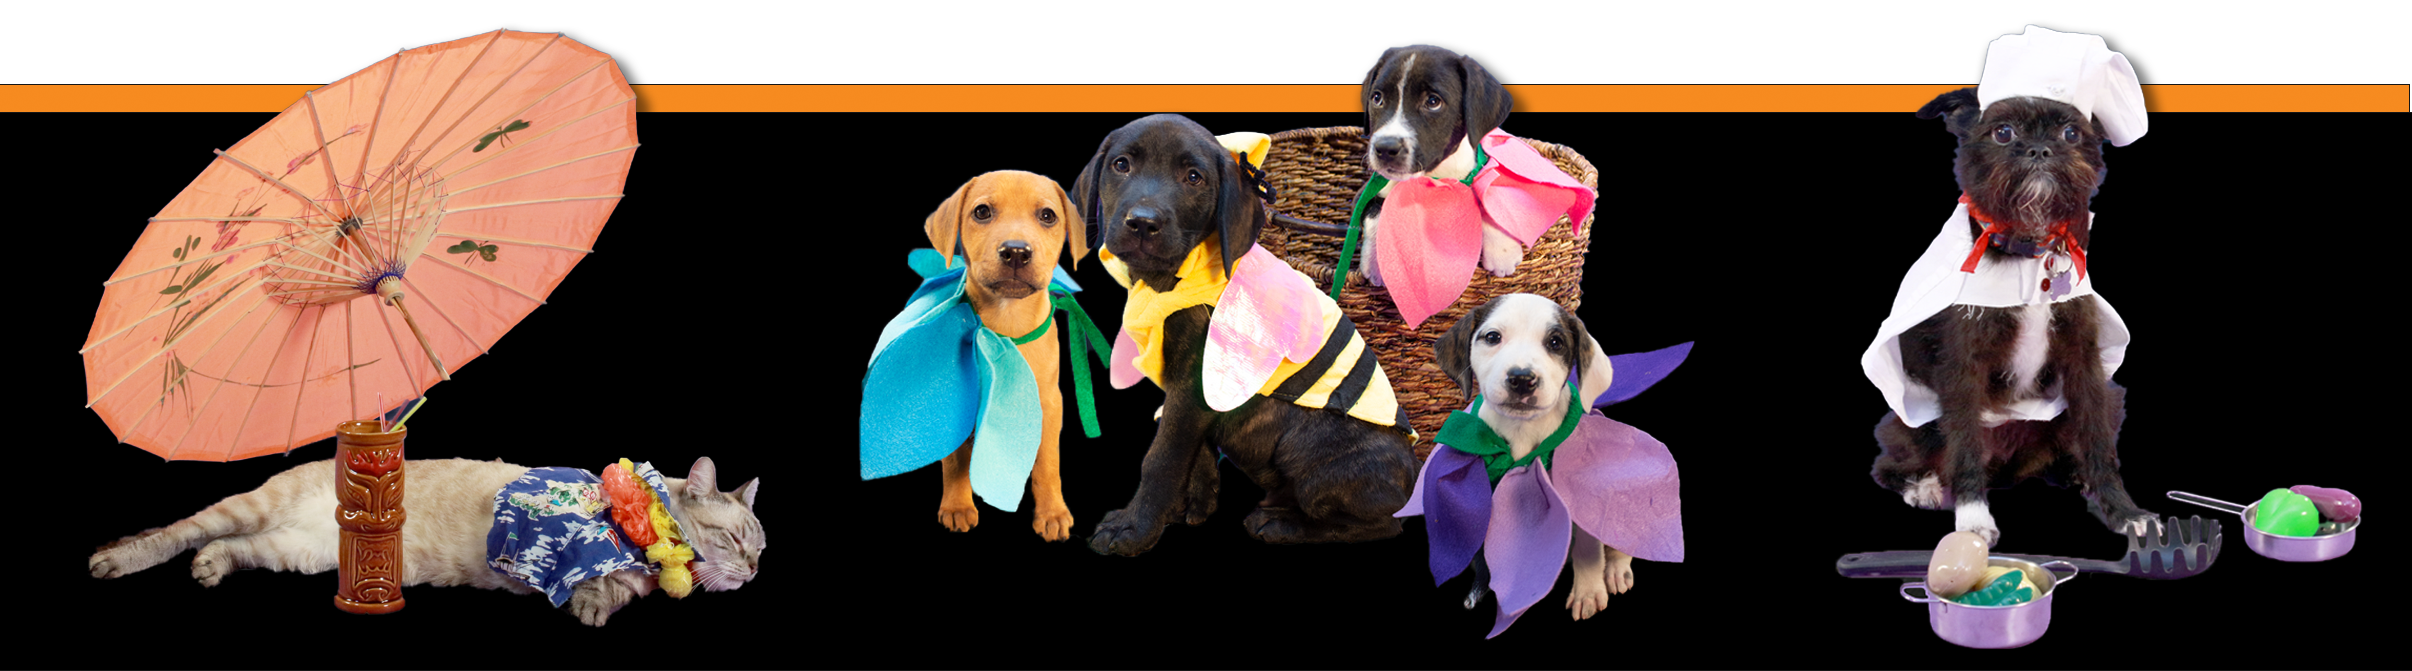 A cat and five dogs wearing Halloween costumes.